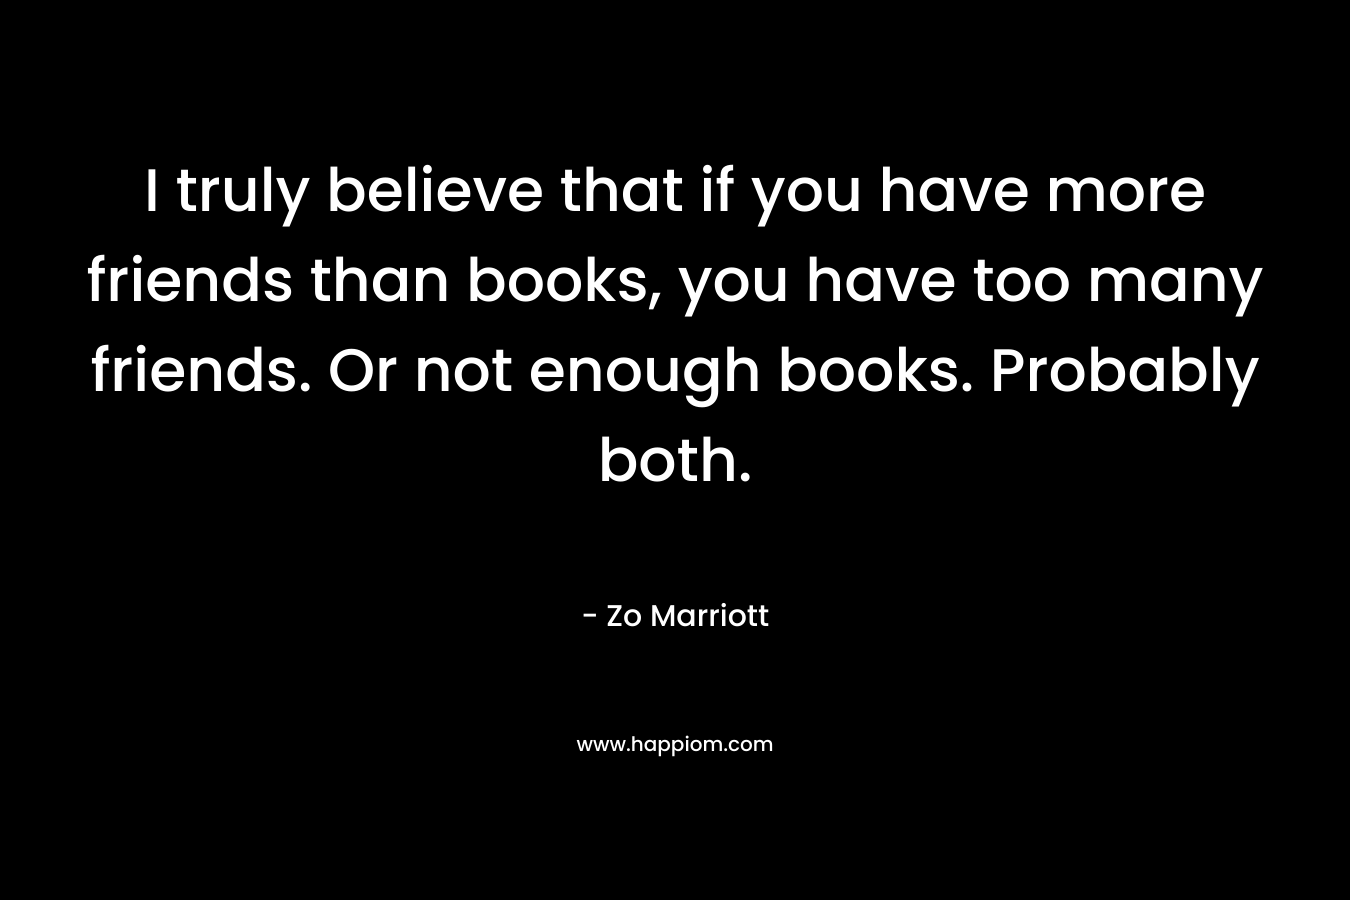 I truly believe that if you have more friends than books, you have too many friends. Or not enough books. Probably both. – Zo Marriott